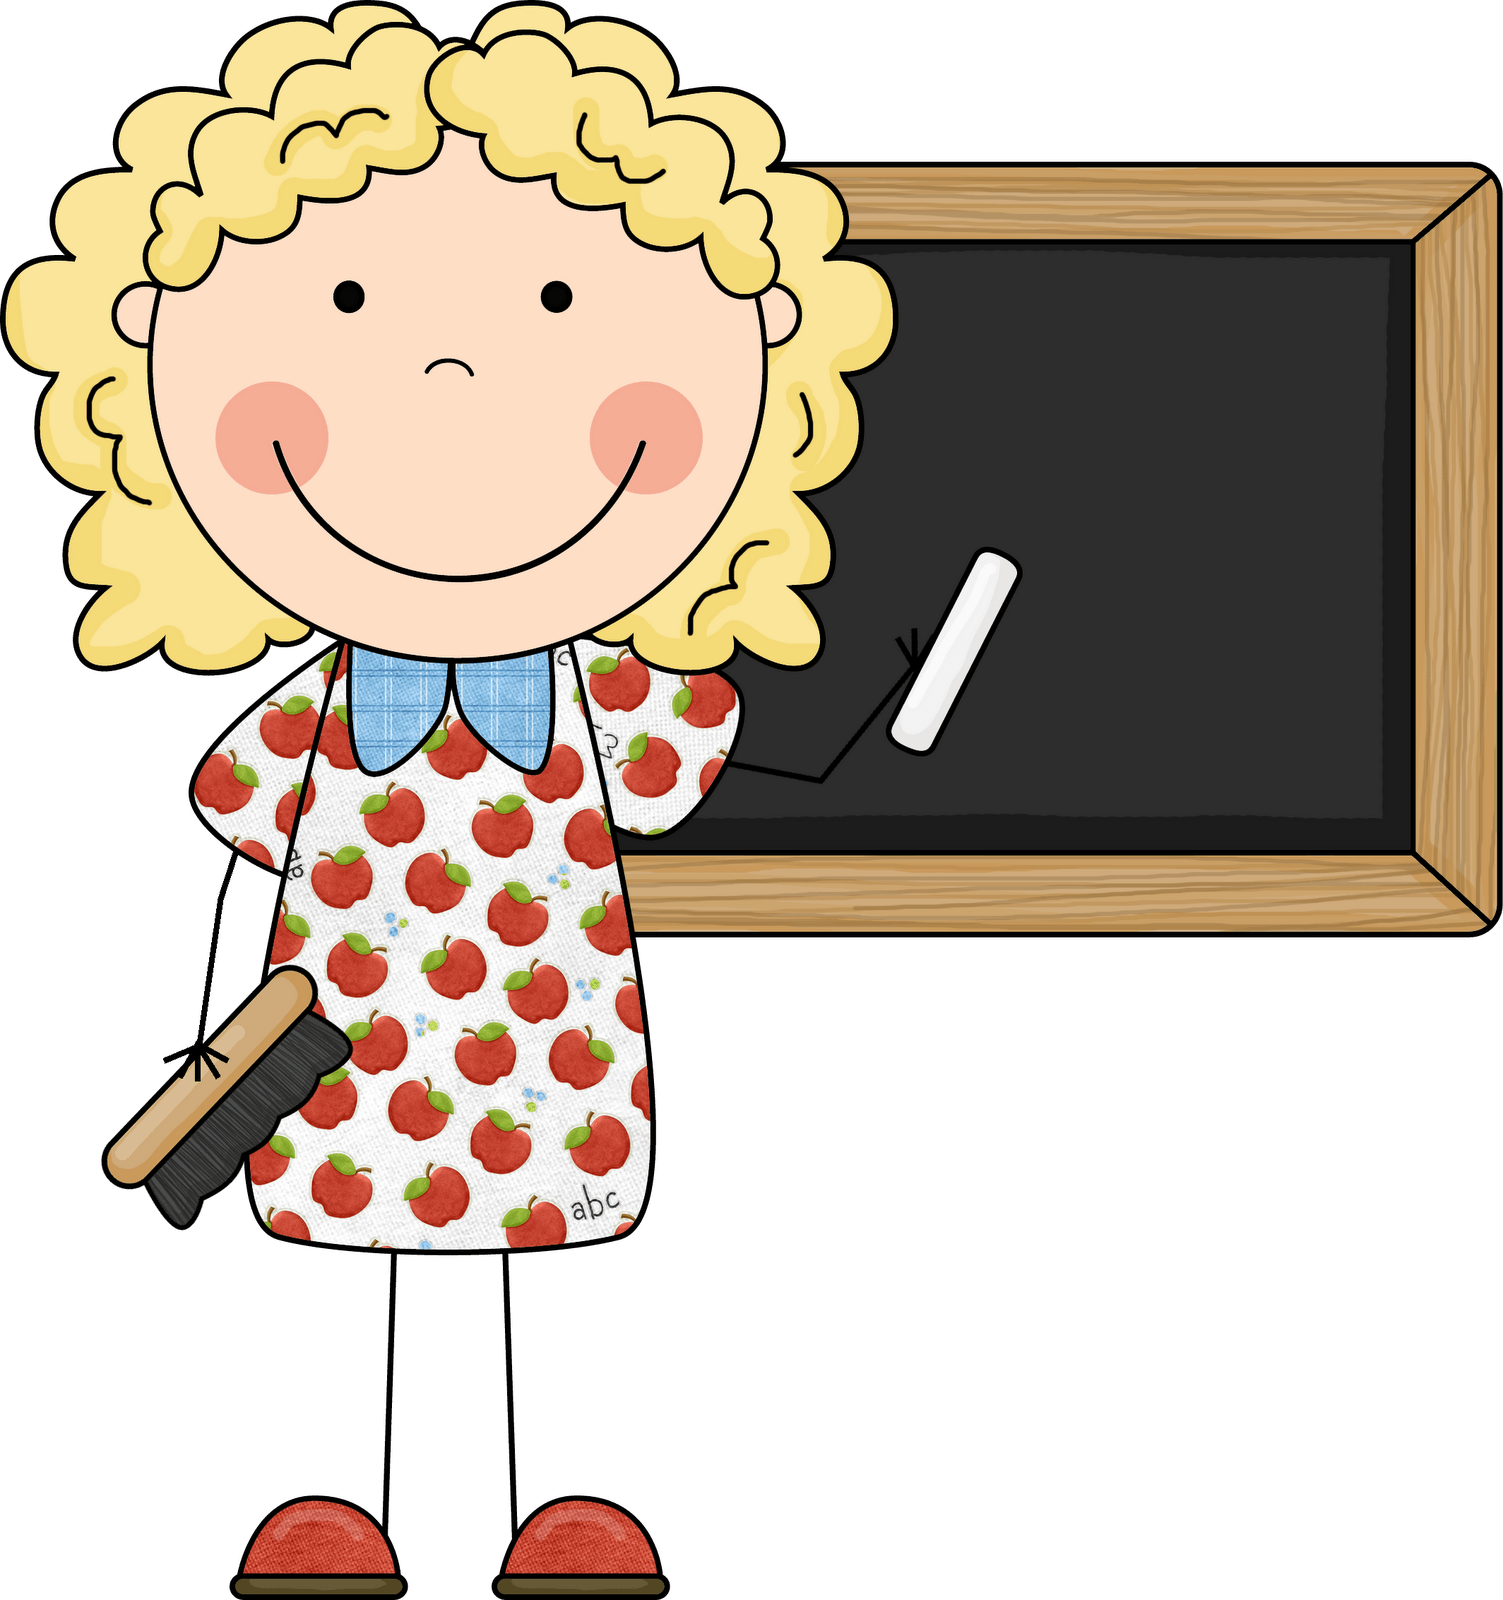 Good teacher google search. Learning clipart testing